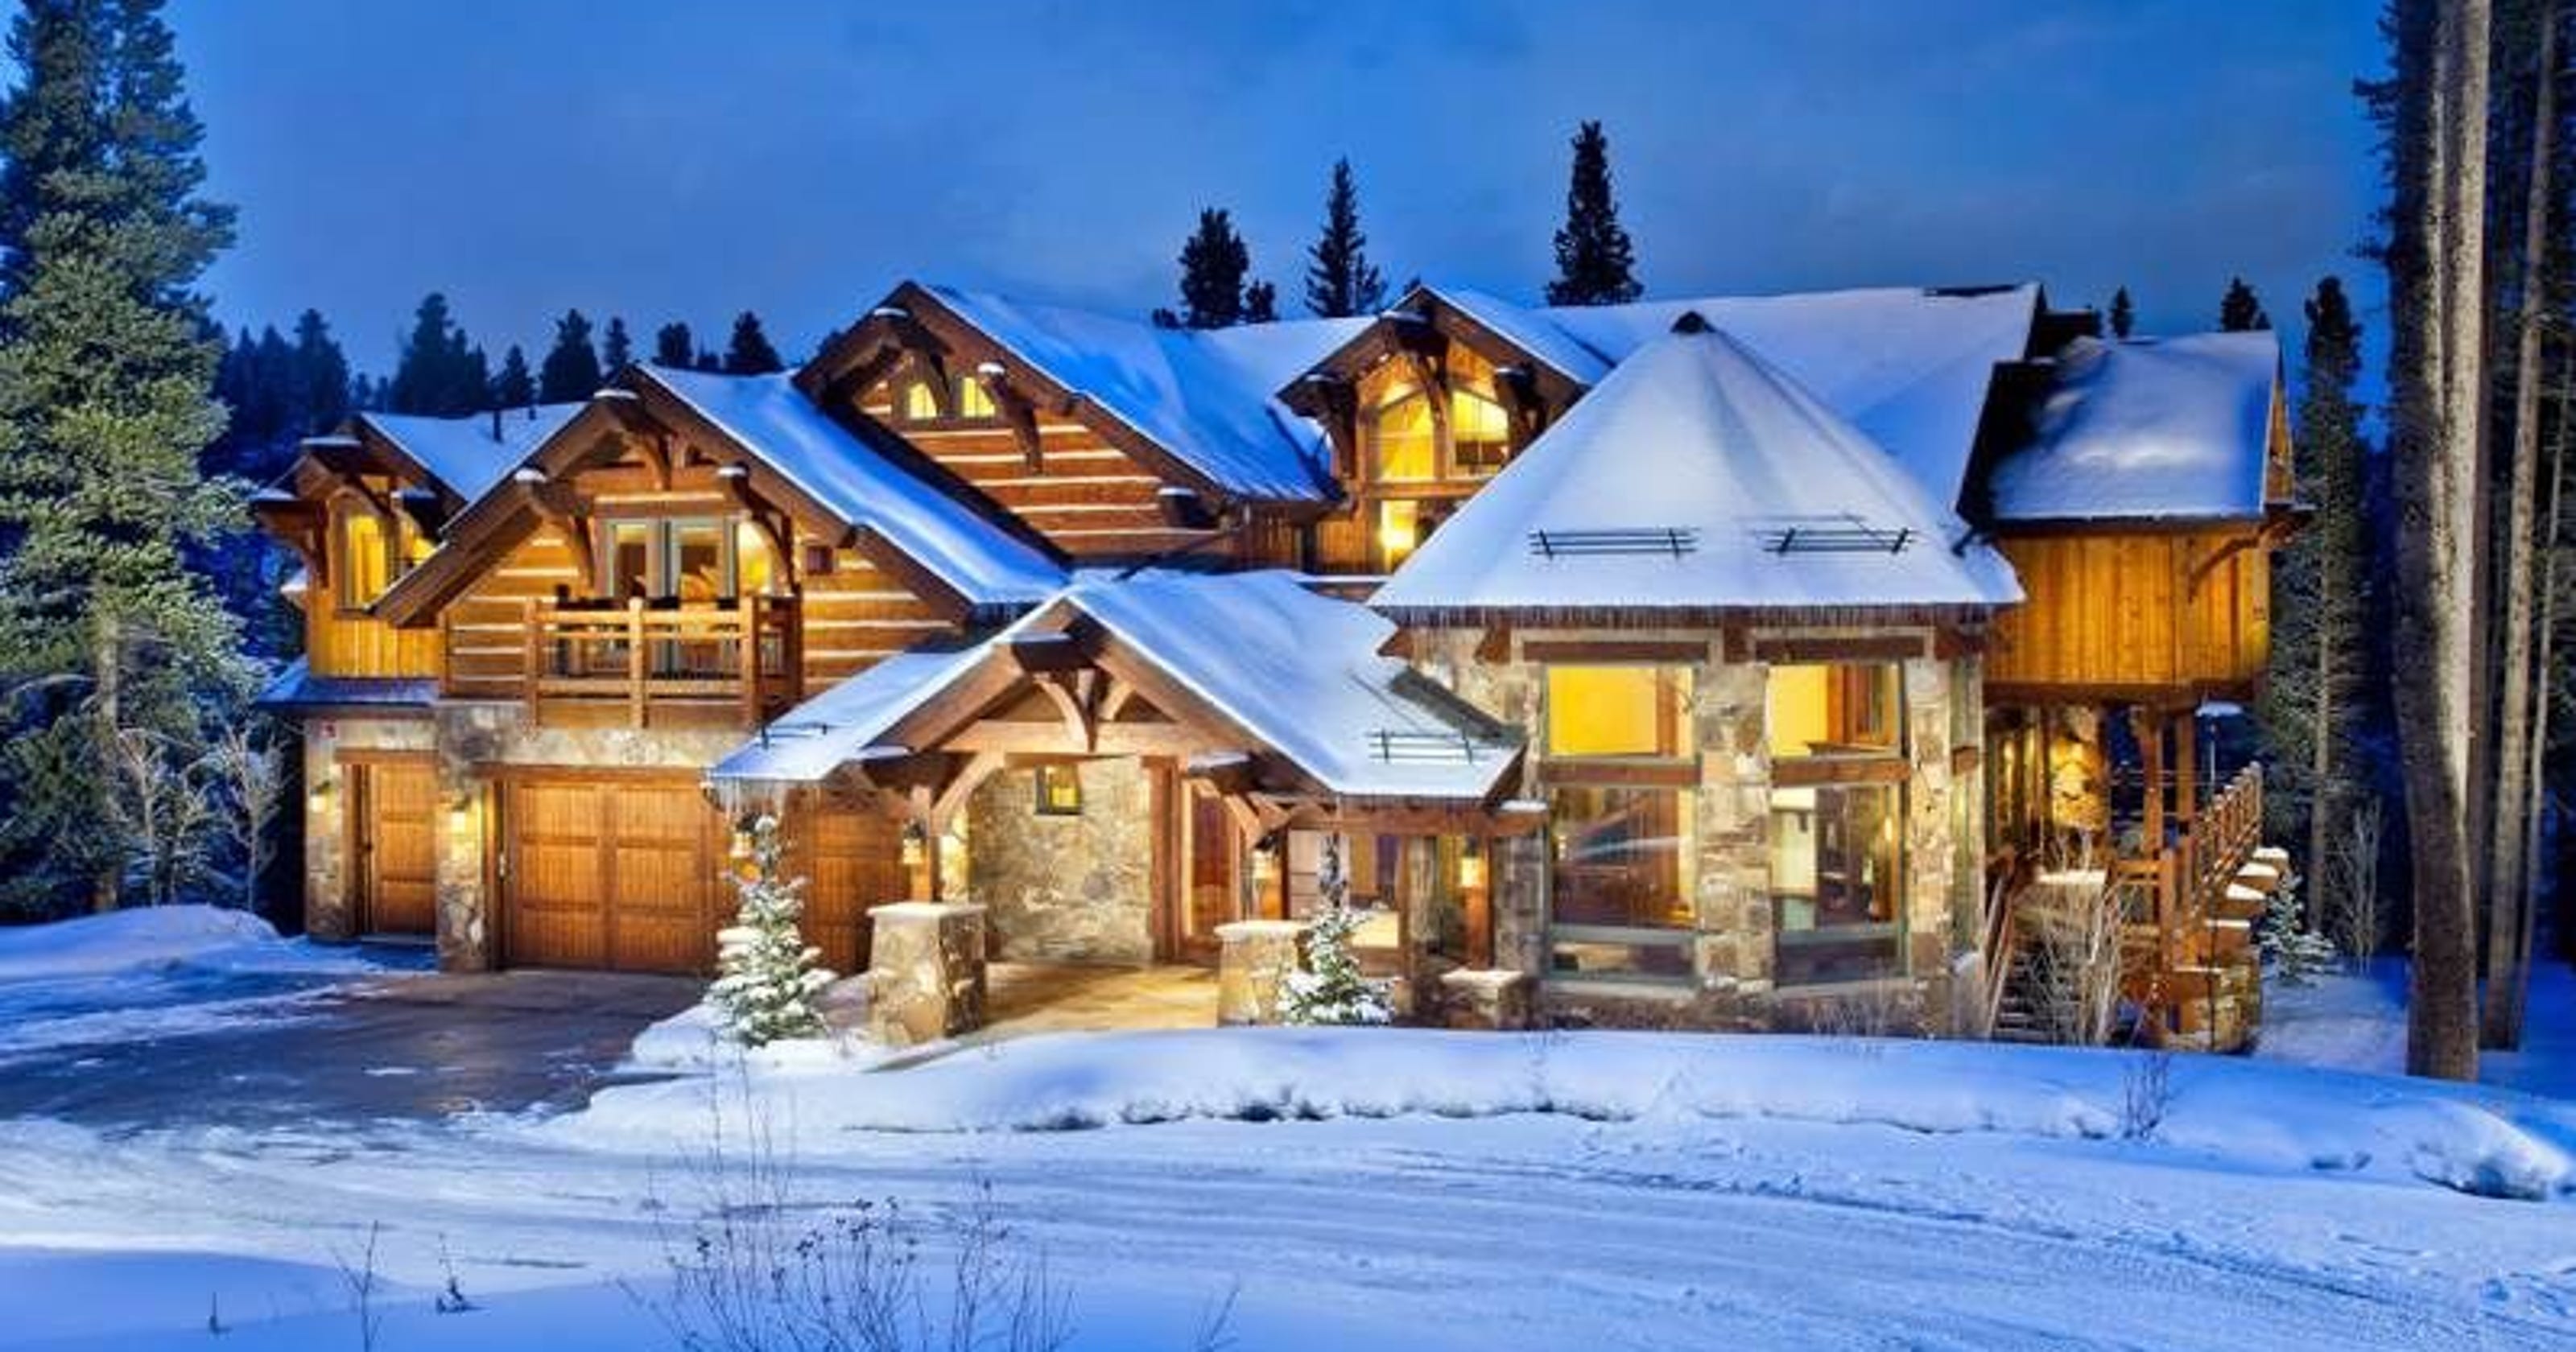 The Most Expensive Ski Vacation Rentals In North America